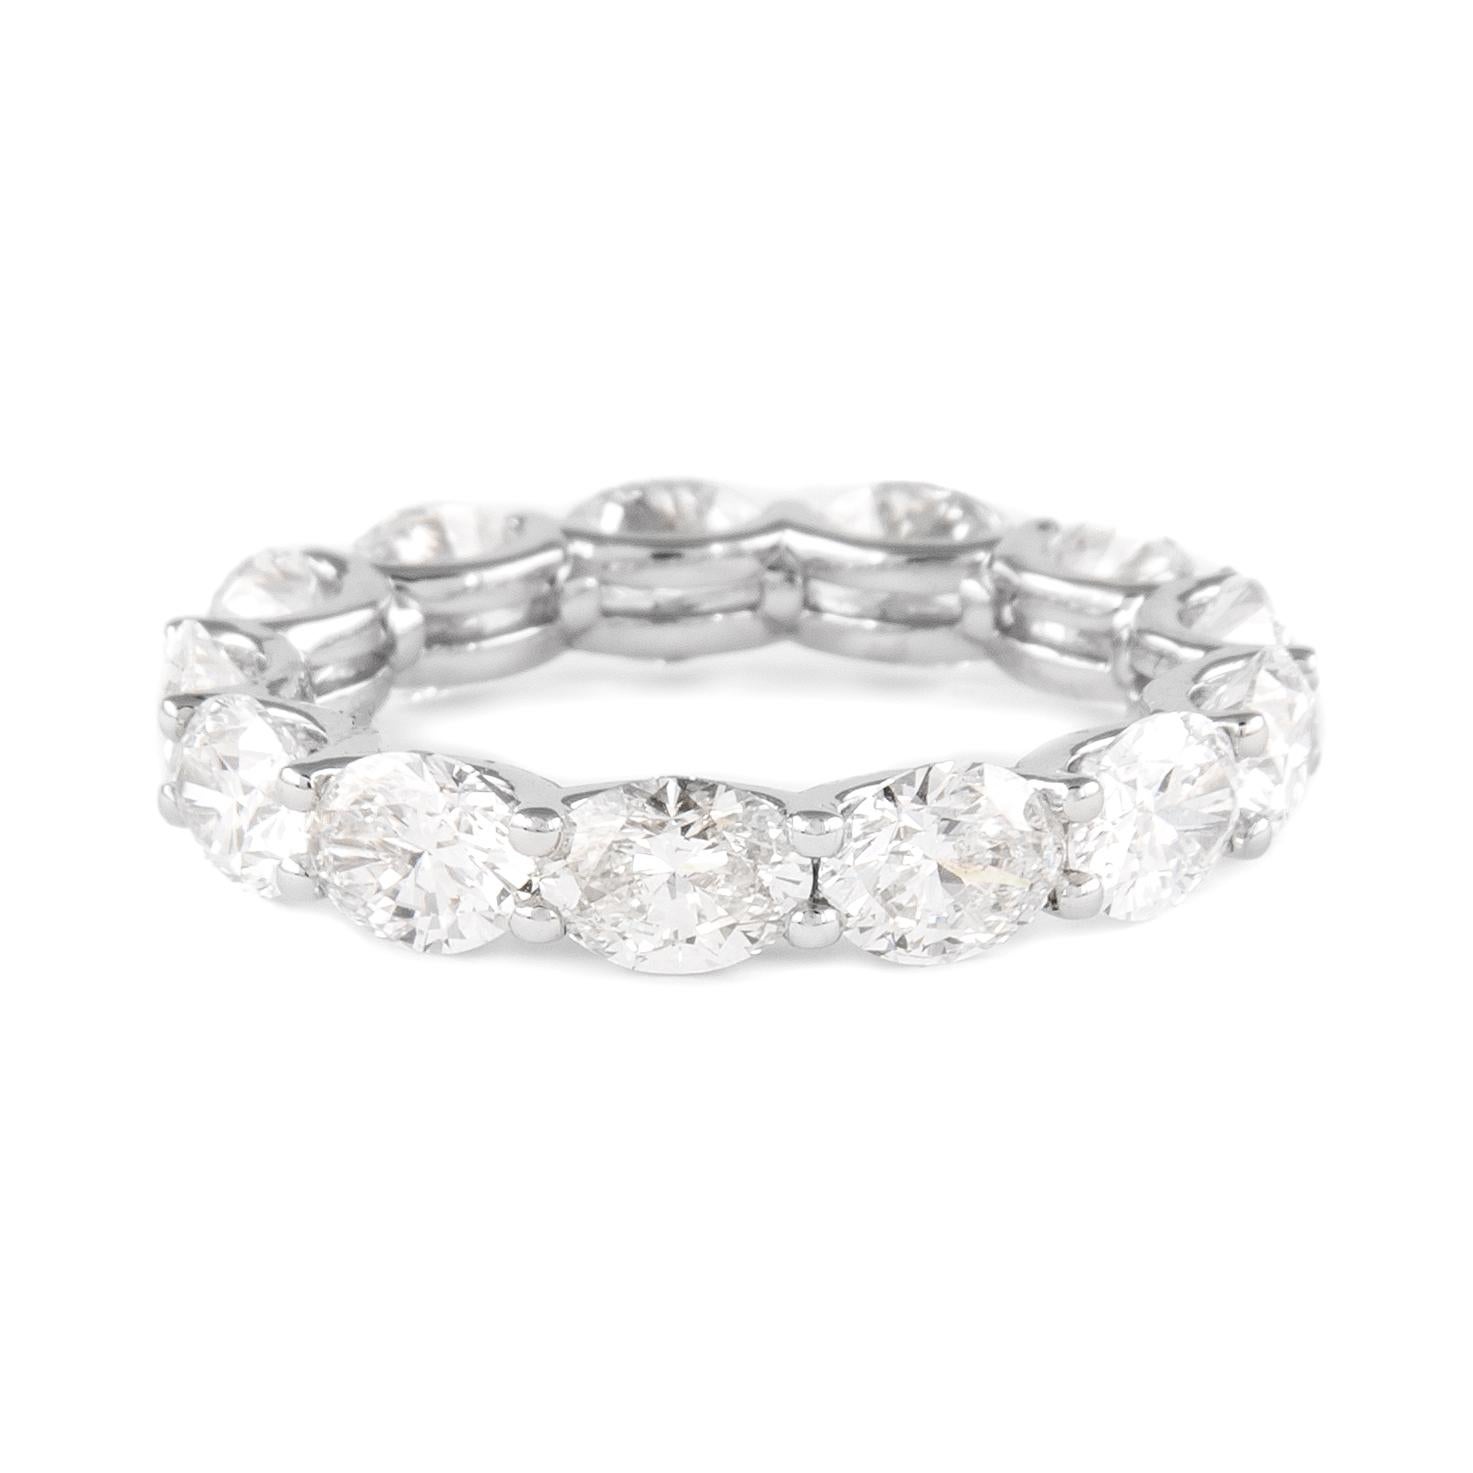 Stunning oval cut diamond eternity band, by Alexander Beverly Hills.
13 oval cut diamonds, 5.39 carats total. F/G color and VS clarity. Set in 18k white gold, 2.98 grams, size 7.5.
Accommodated with an up to date appraisal by a GIA G.G., upon